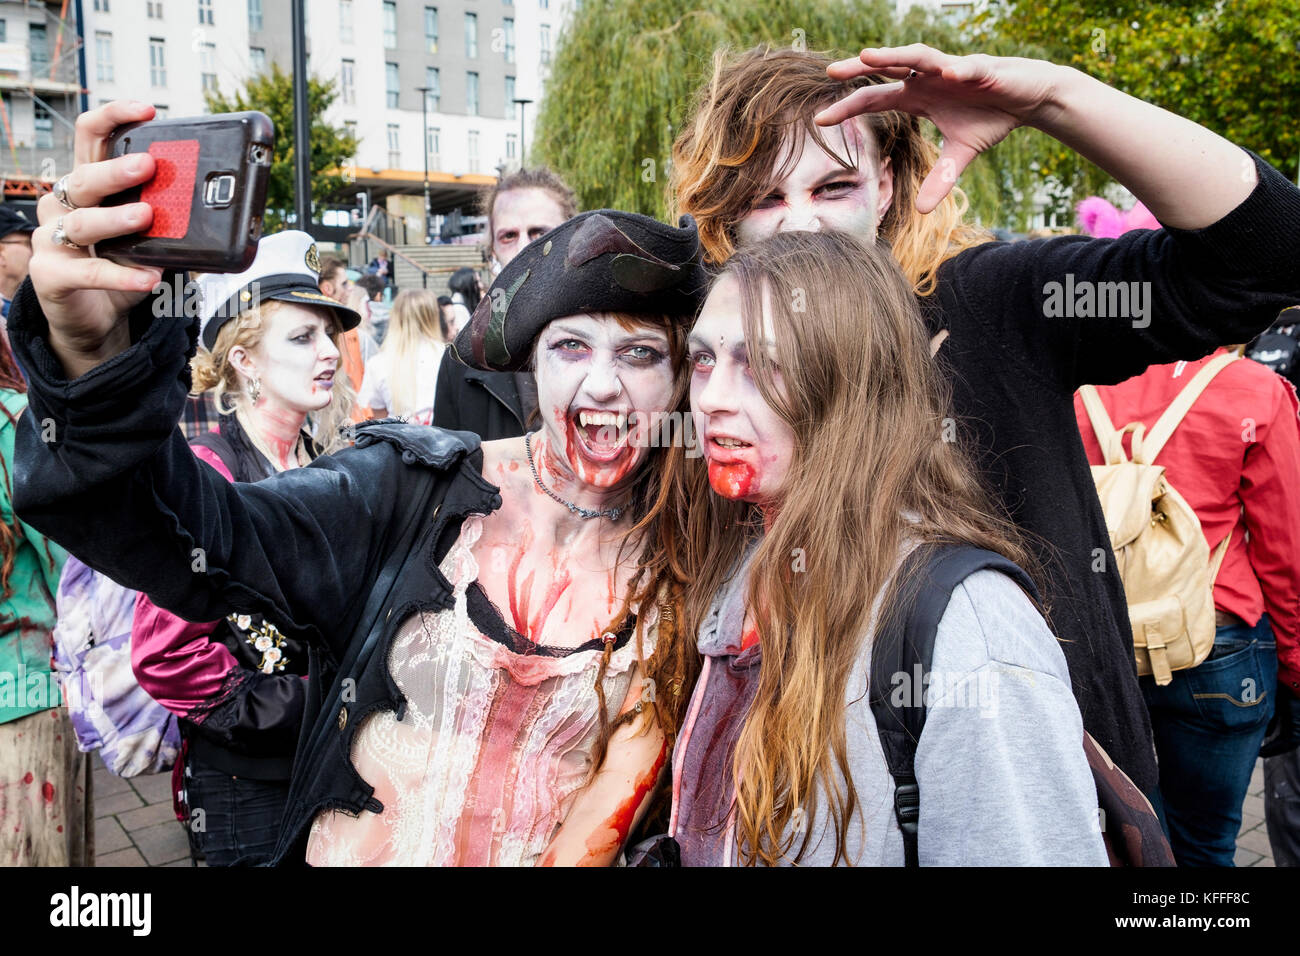 Bristol, UK. 28th Oct, 2017. A group of people dressed as zombies and taking part in a zombie walk through the city centre are pictured as they pose for a selfie. Stock Photo